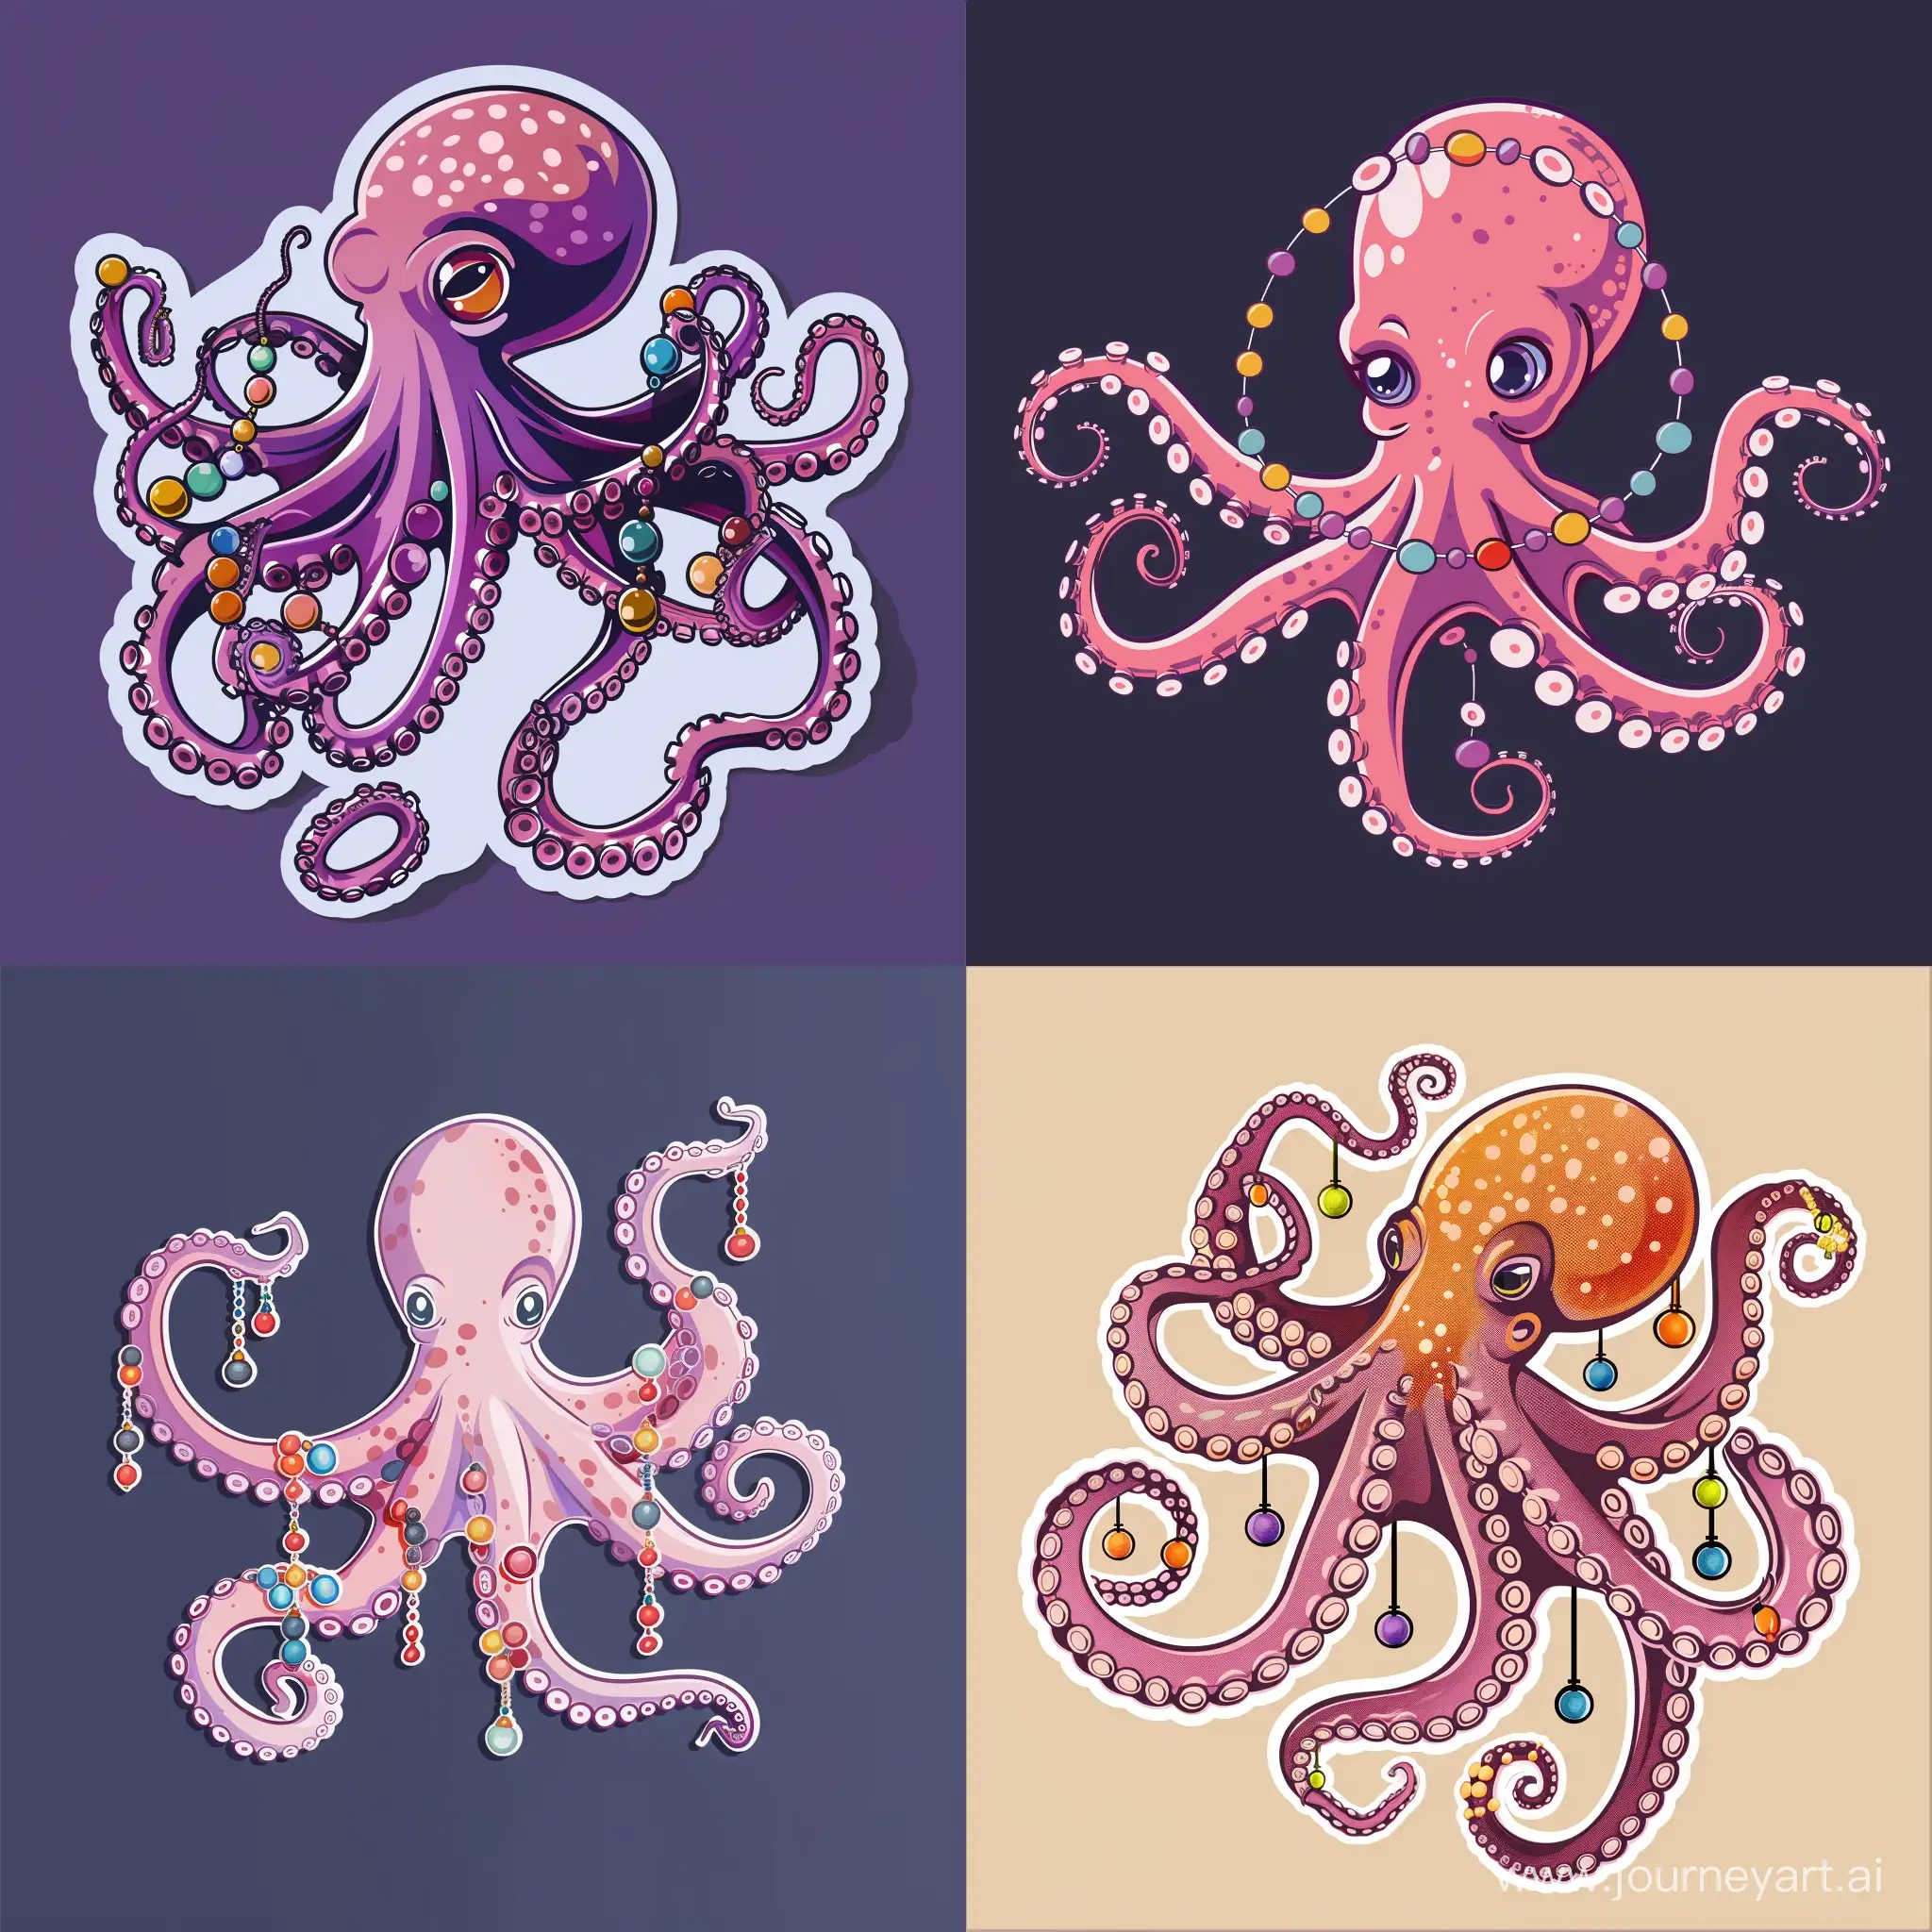 Vector-Illustration-of-Adorable-Octopus-Holding-Beads